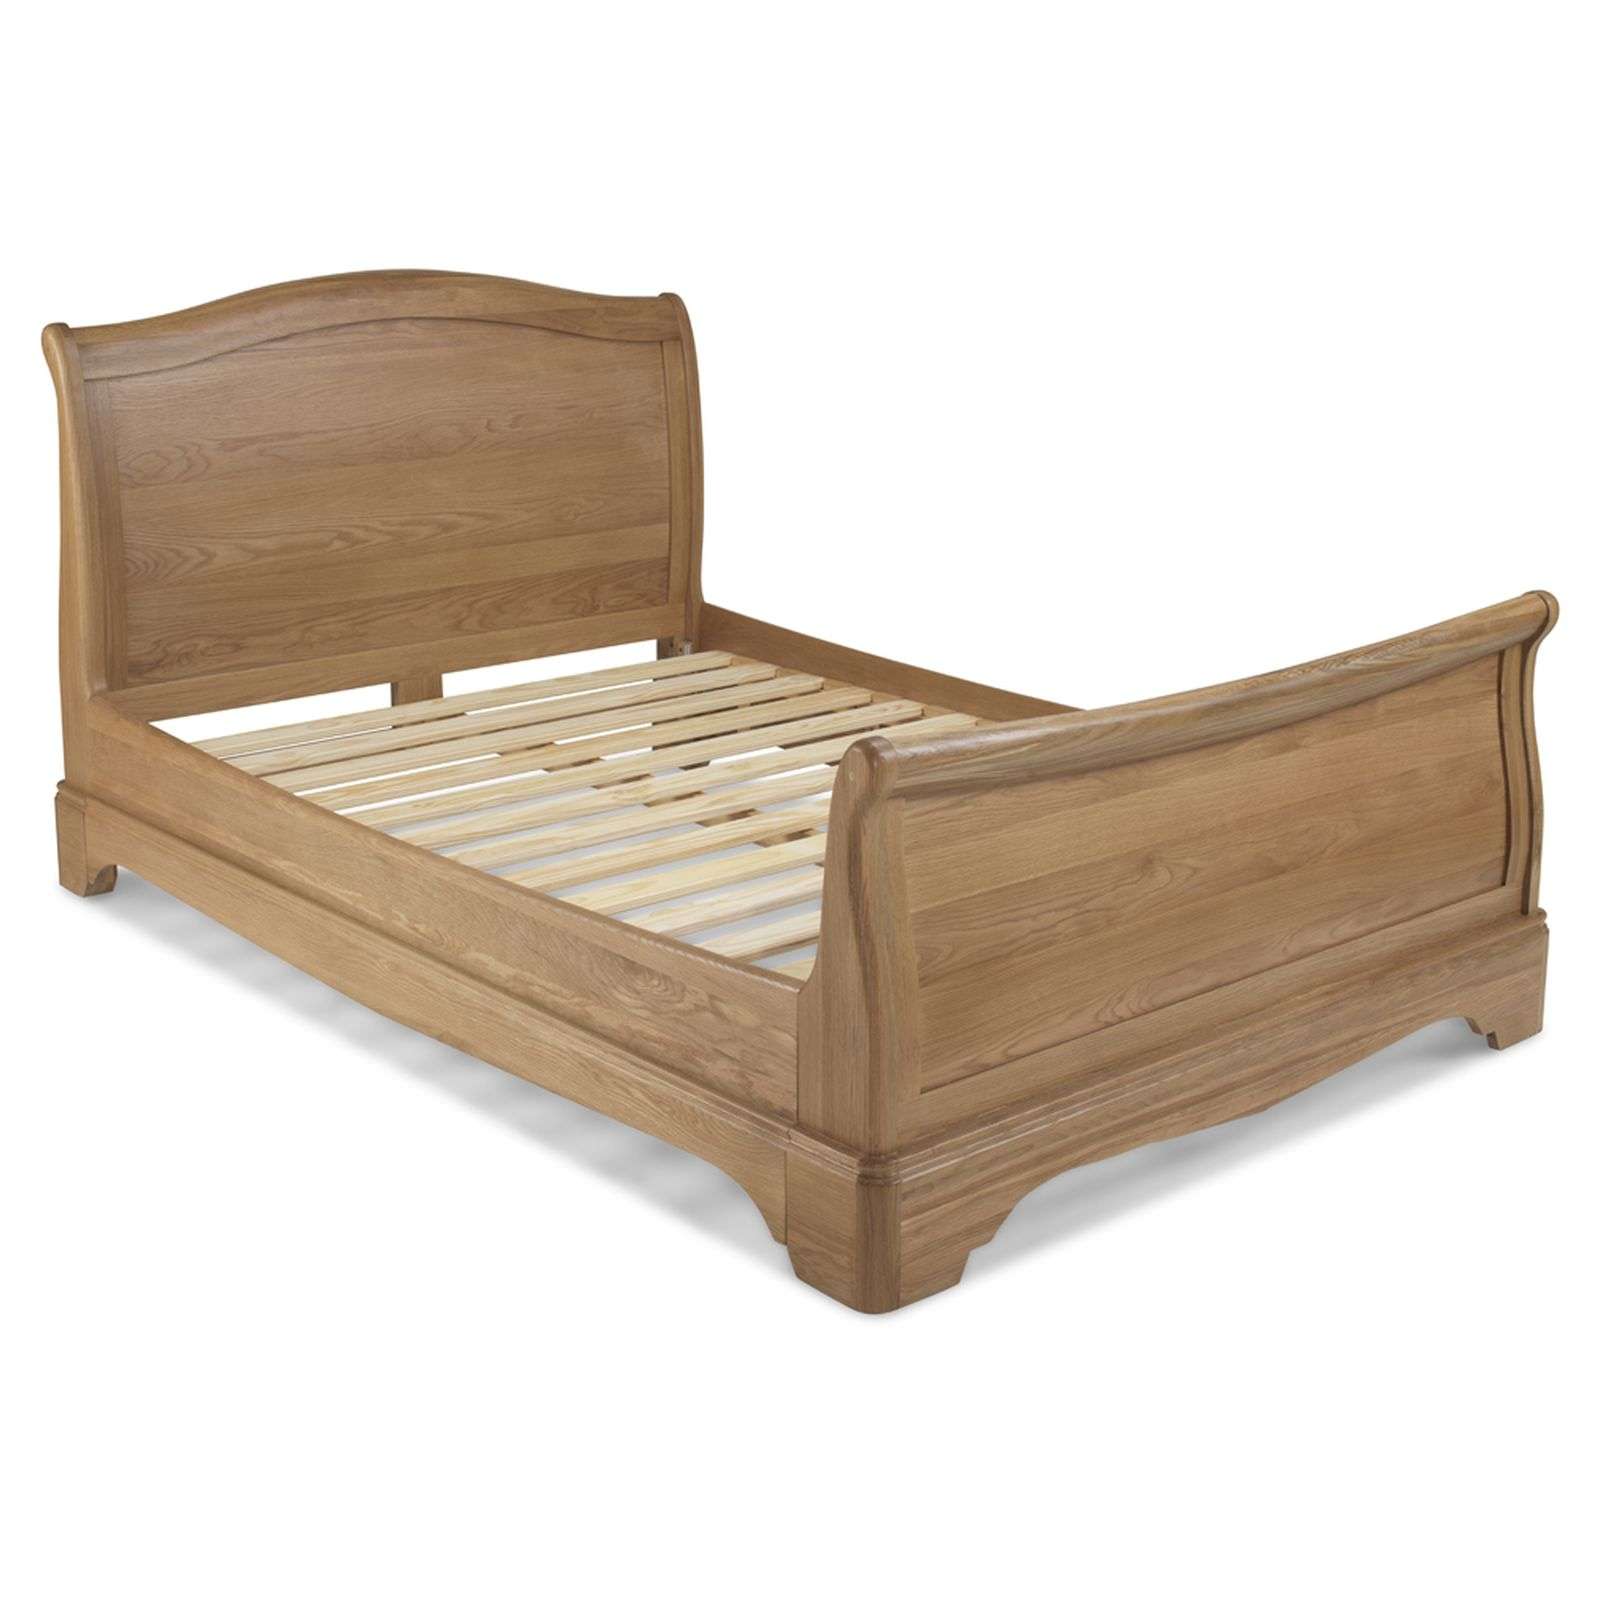 Leyburn Oak King Size Bed Frame, What Is The Cost Of A King Size Bed Frame